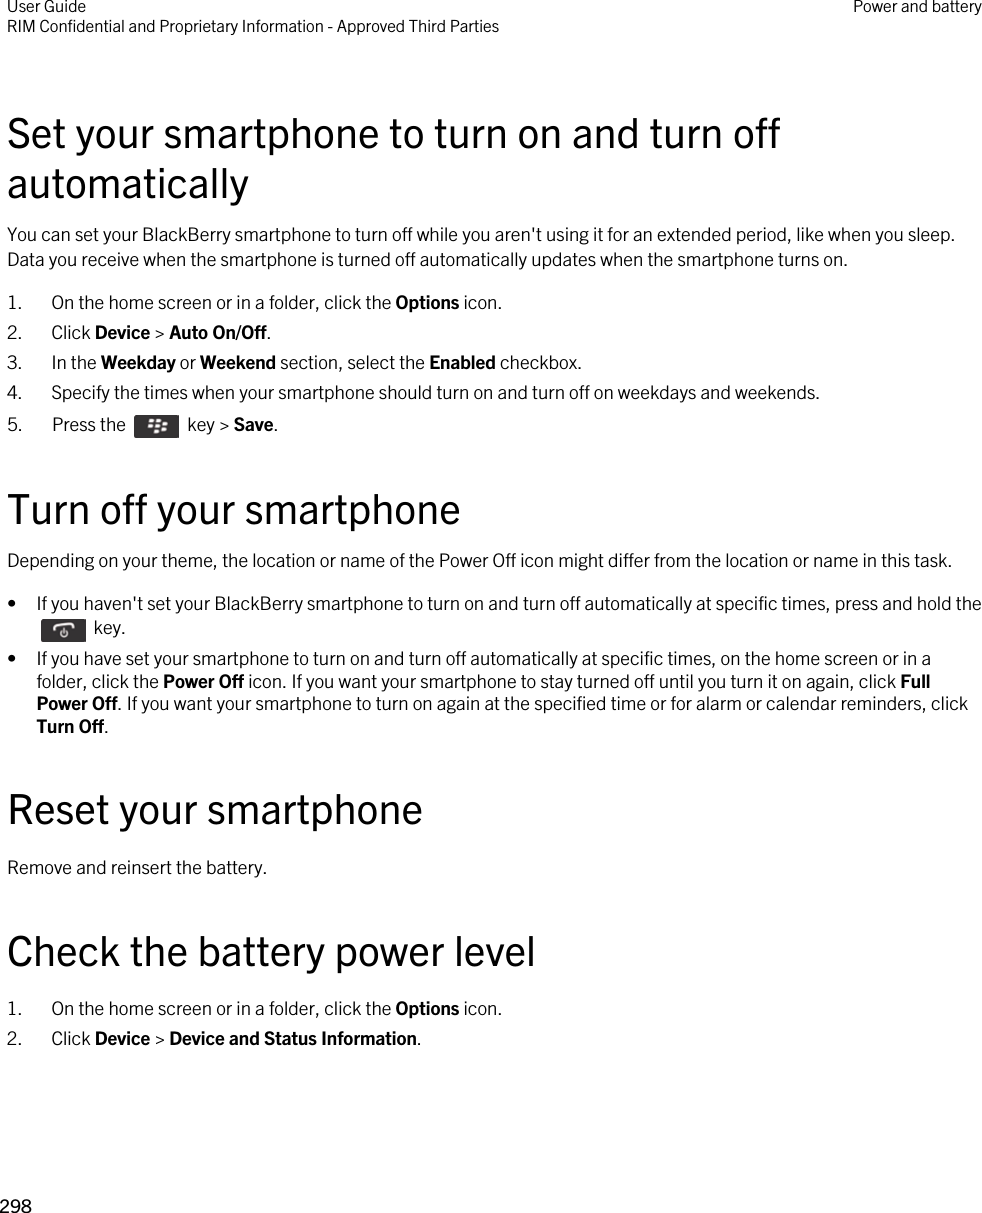 Set your smartphone to turn on and turn off automaticallyYou can set your BlackBerry smartphone to turn off while you aren&apos;t using it for an extended period, like when you sleep. Data you receive when the smartphone is turned off automatically updates when the smartphone turns on.1. On the home screen or in a folder, click the Options icon.2. Click Device &gt; Auto On/Off.3. In the Weekday or Weekend section, select the Enabled checkbox.4. Specify the times when your smartphone should turn on and turn off on weekdays and weekends.5.  Press the    key &gt; Save. Turn off your smartphoneDepending on your theme, the location or name of the Power Off icon might differ from the location or name in this task.• If you haven&apos;t set your BlackBerry smartphone to turn on and turn off automatically at specific times, press and hold the   key. • If you have set your smartphone to turn on and turn off automatically at specific times, on the home screen or in a folder, click the Power Off icon. If you want your smartphone to stay turned off until you turn it on again, click Full Power Off. If you want your smartphone to turn on again at the specified time or for alarm or calendar reminders, click Turn Off.Reset your smartphoneRemove and reinsert the battery.Check the battery power level1. On the home screen or in a folder, click the Options icon.2. Click Device &gt; Device and Status Information.User GuideRIM Confidential and Proprietary Information - Approved Third Parties Power and battery298 